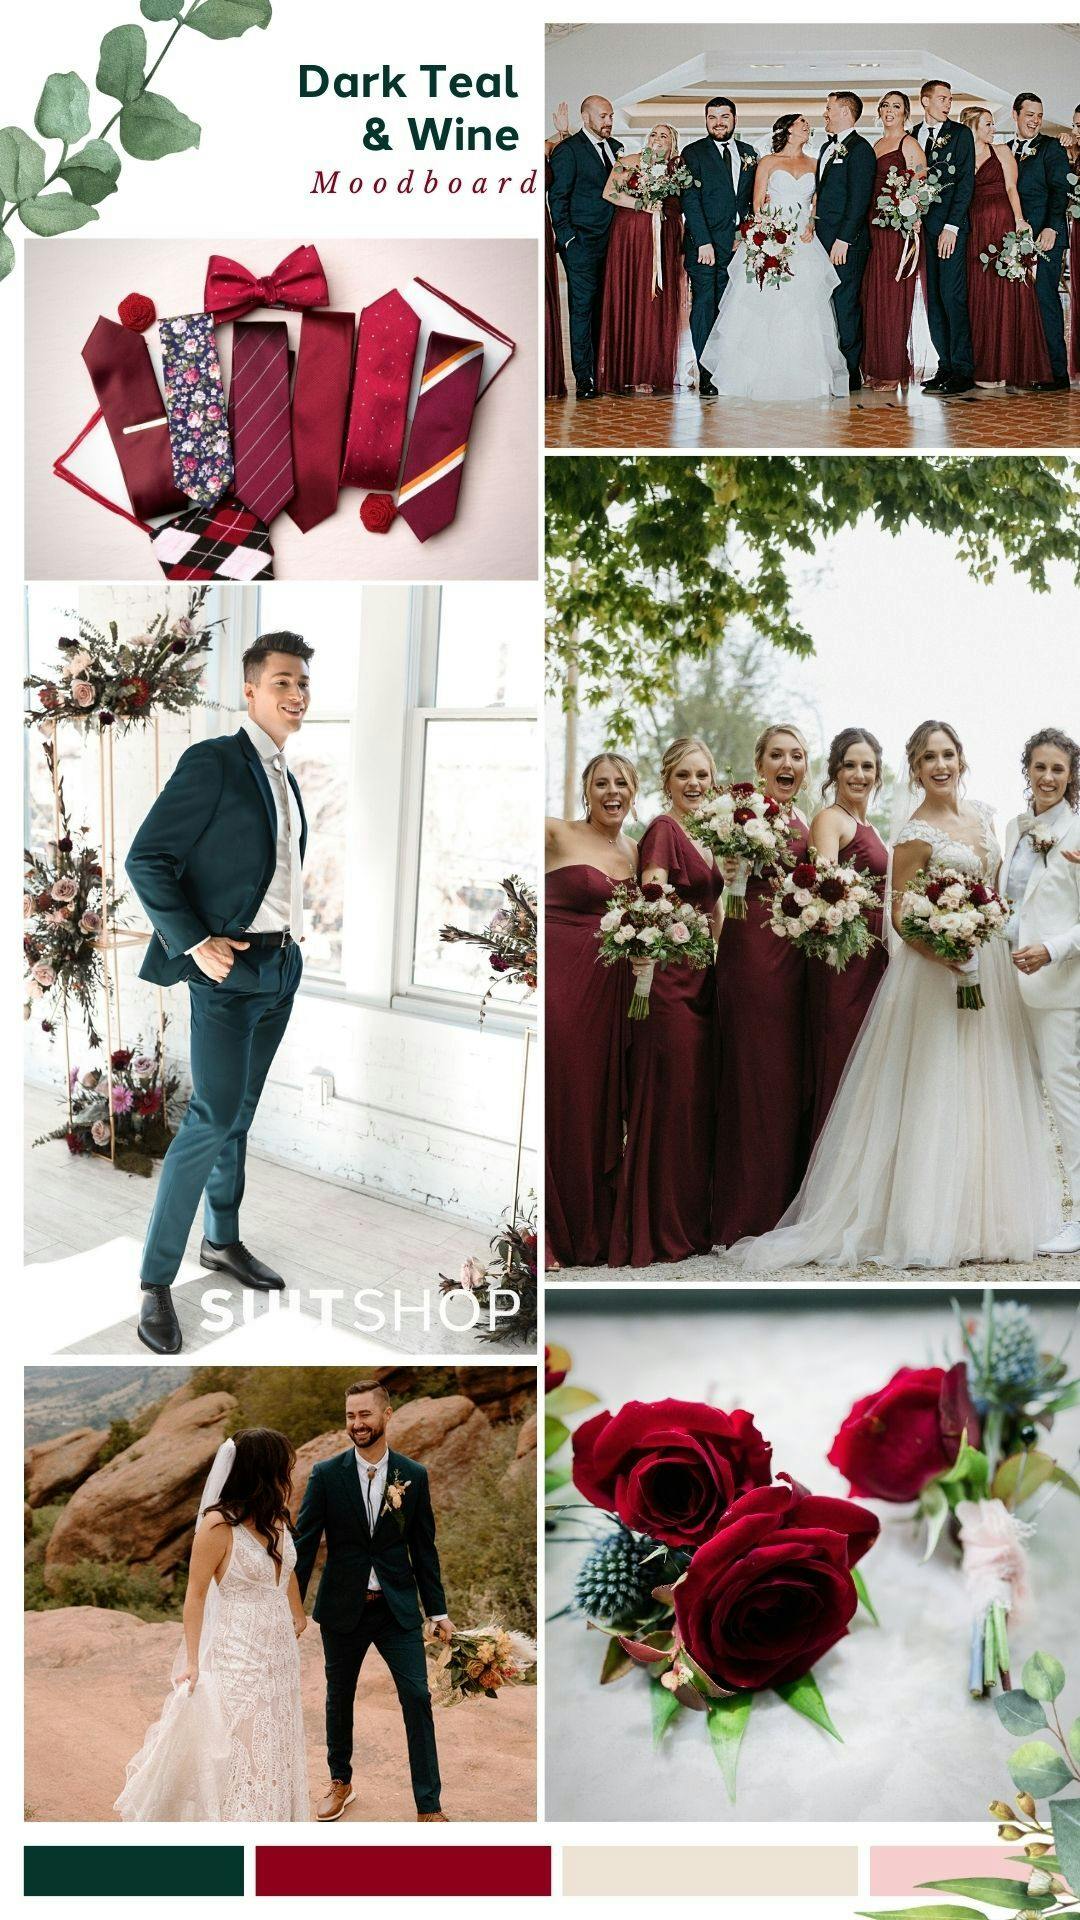 Maroon, burgundy, and wine red with blue, green, and teal unique wedding colors for fall mood board of wedding suits and bridesmaids dresses.